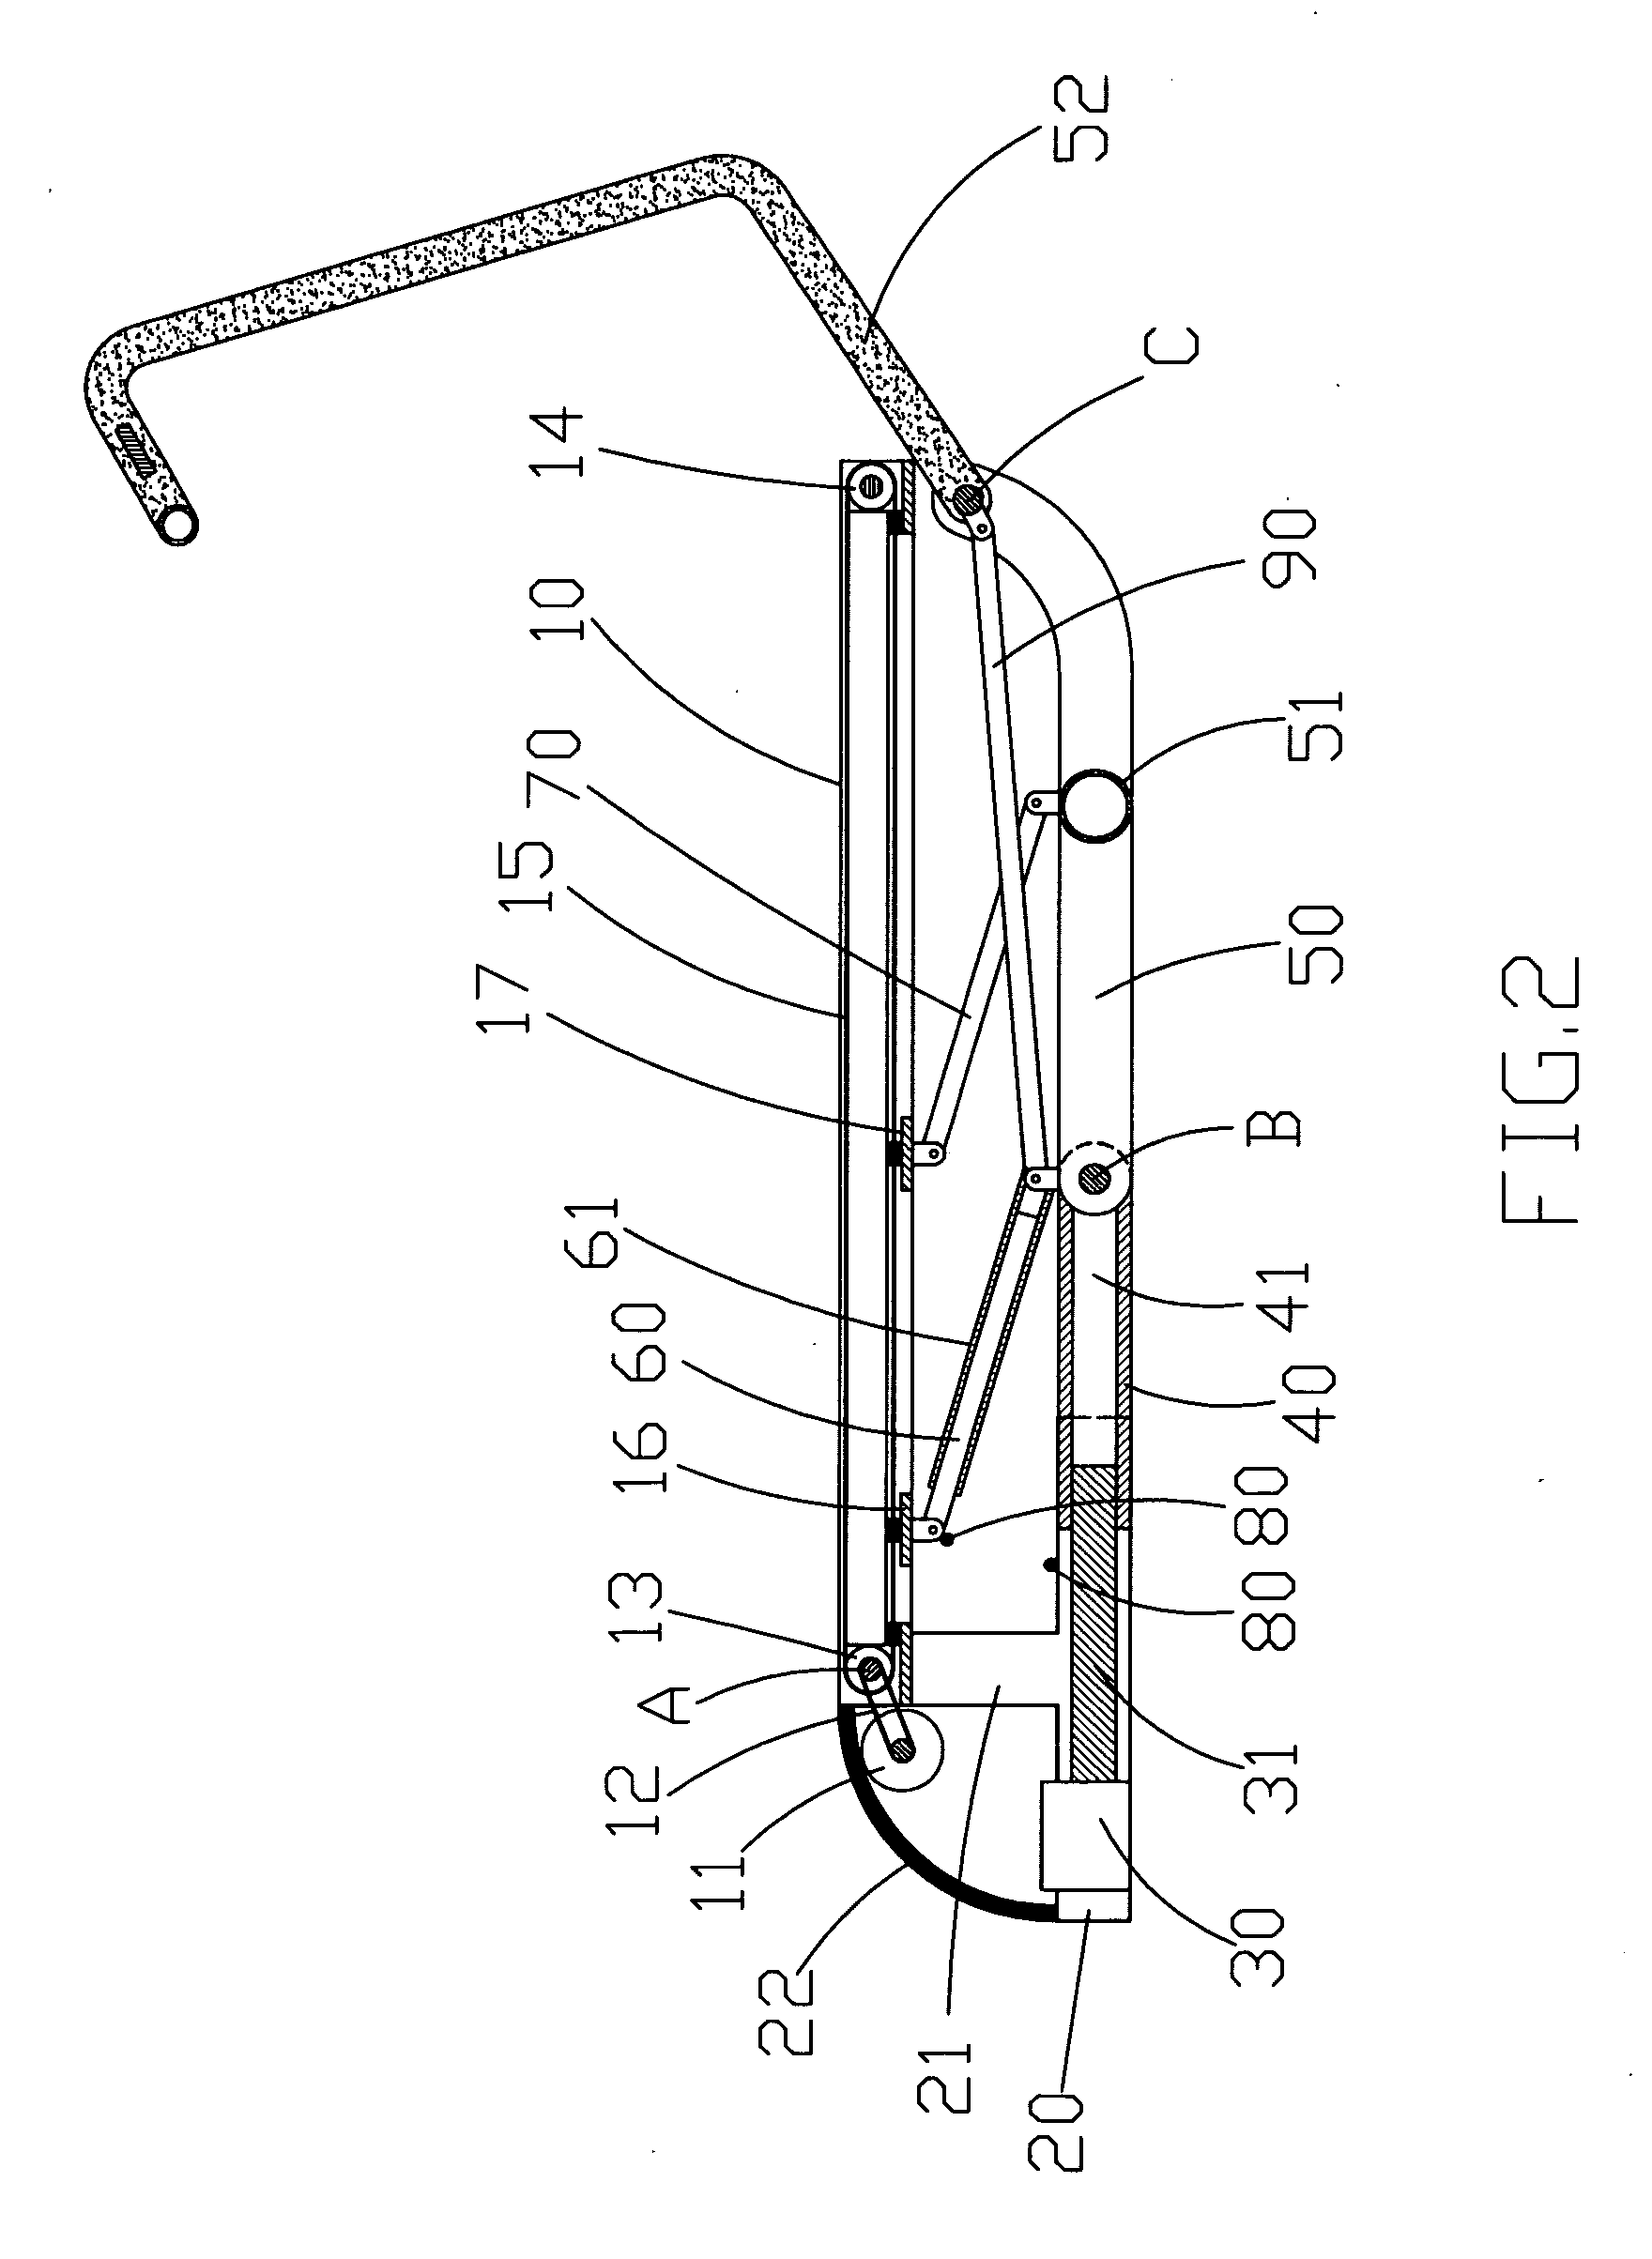 Folding-up mechanism for an electric treadmill